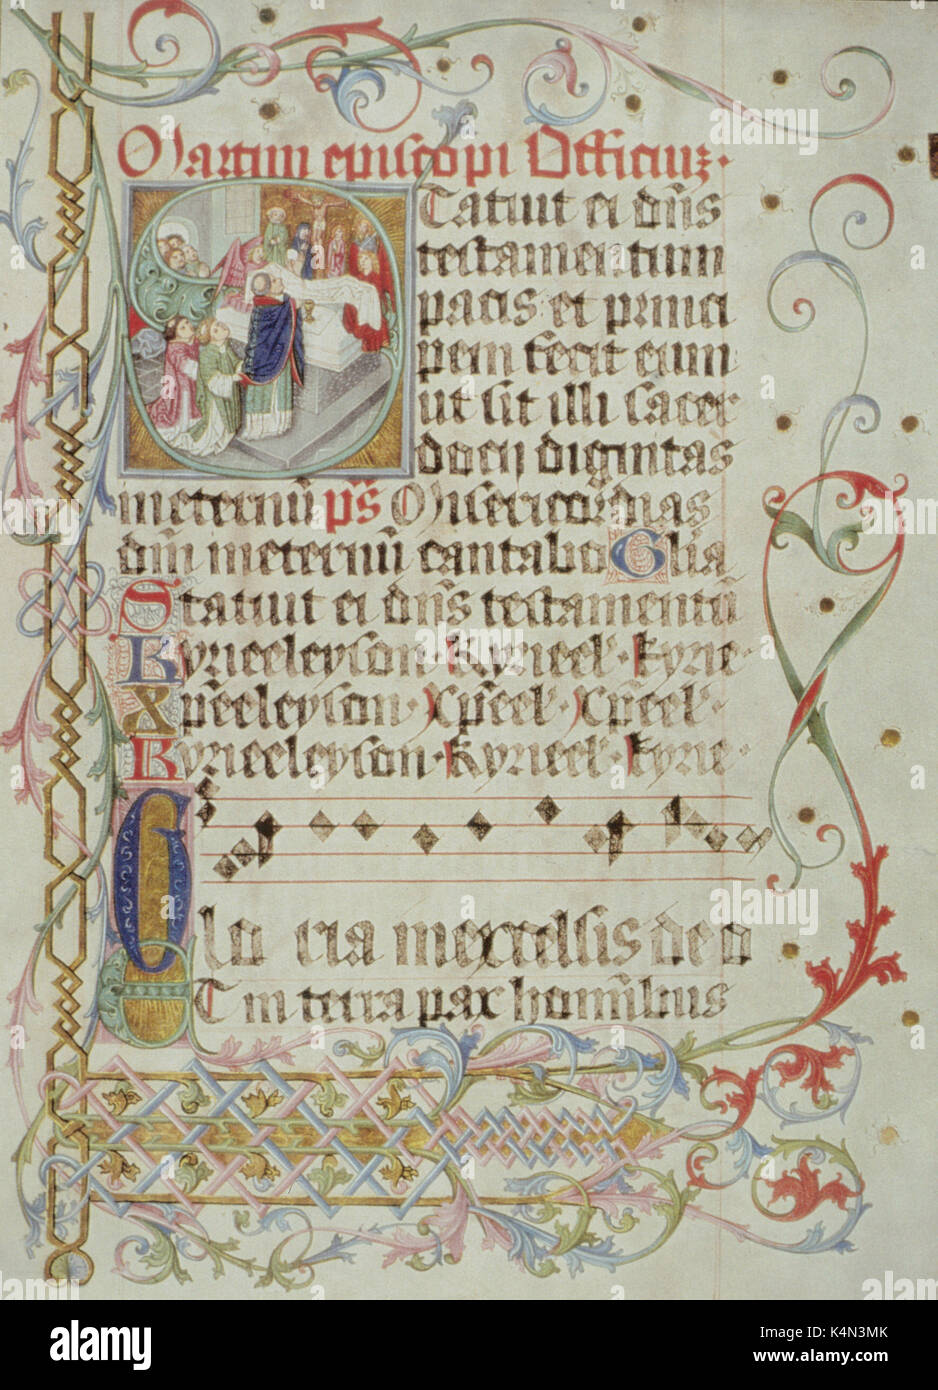 Medieval score - 'INTROIT AND GLORIA' - 1481. Illuminated manuscript. Example of Gregorian chant. Plainsong. Music written on four line stave - black notes on red lines.  For Martinmas from the Furtmeyer Missal for Archbishop Bernard of Salzburg. Example of Gregorian chant. Plainsong. Stock Photo